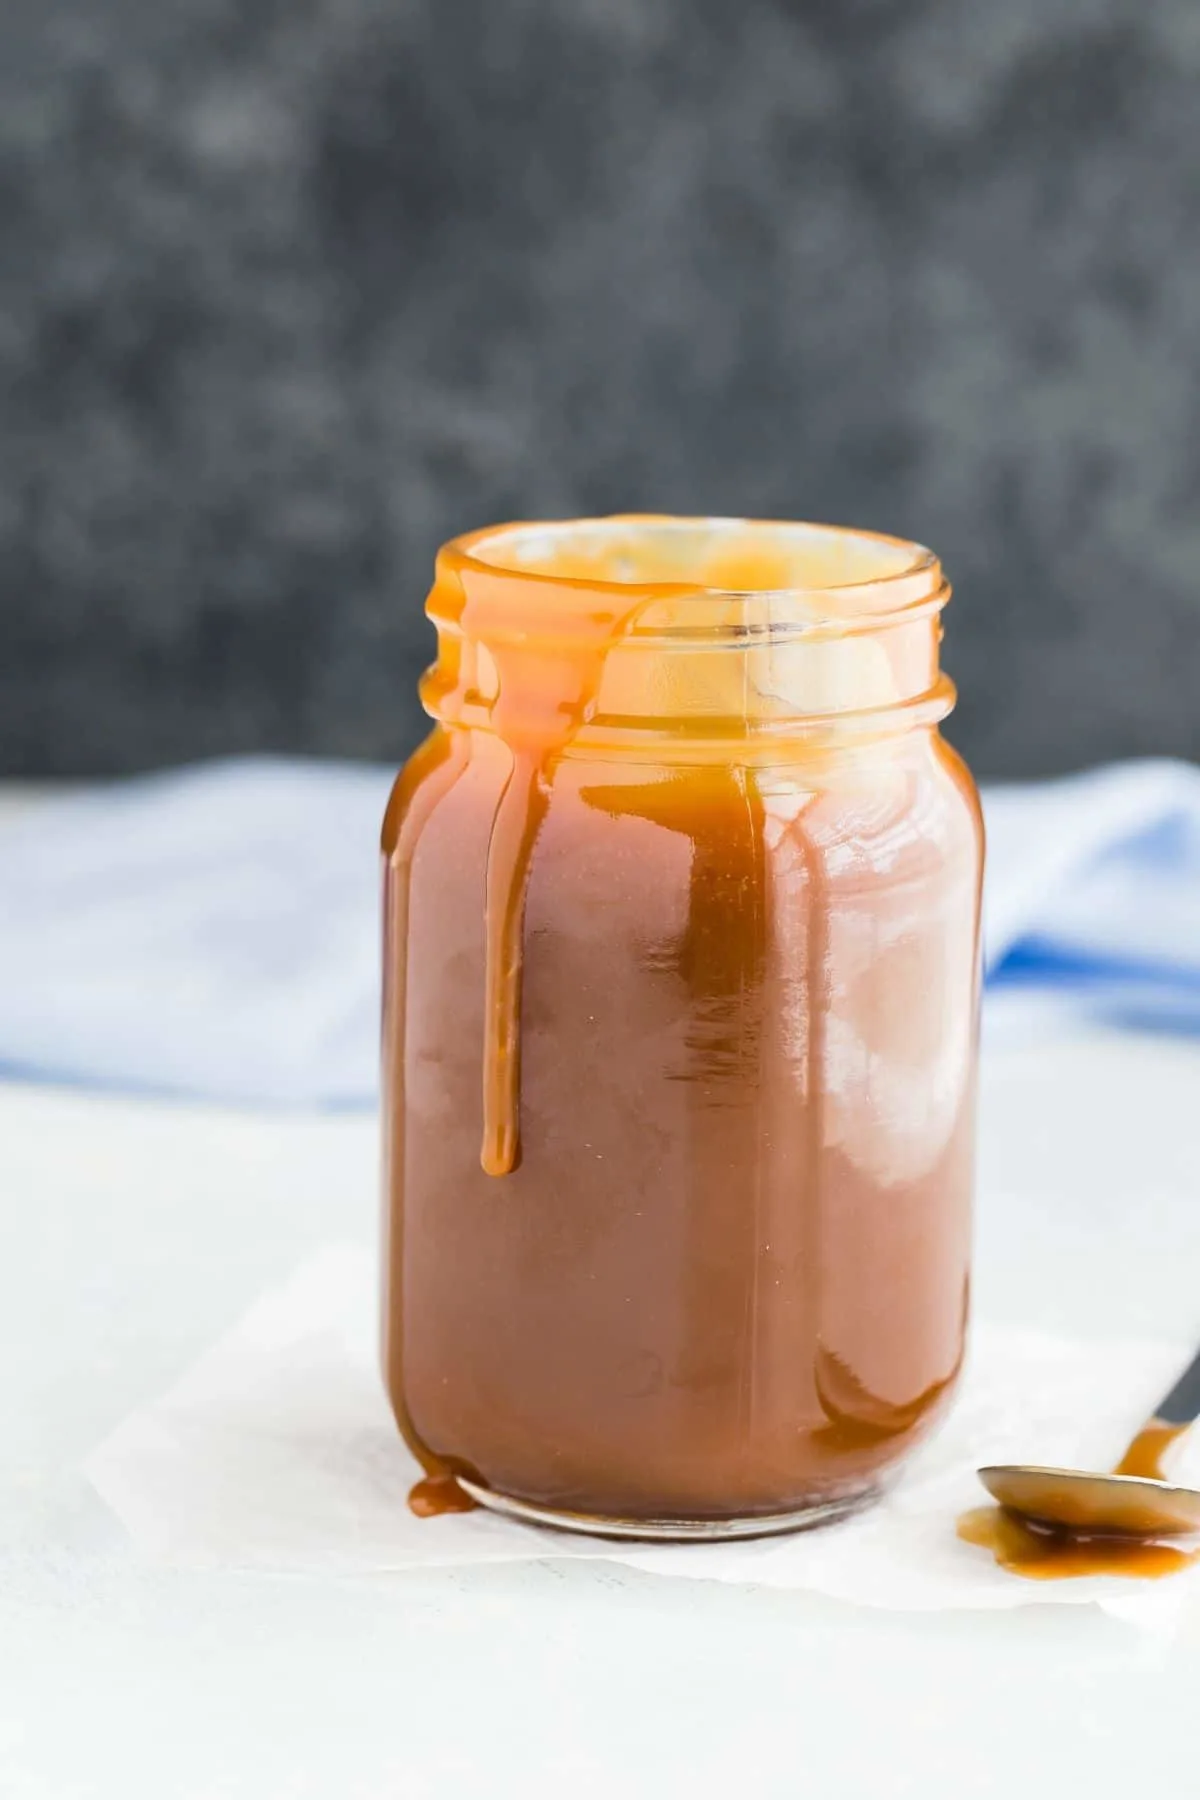 A jar of caramel sauce with caramel dripping down the side and a spoon sitting next to the jar.